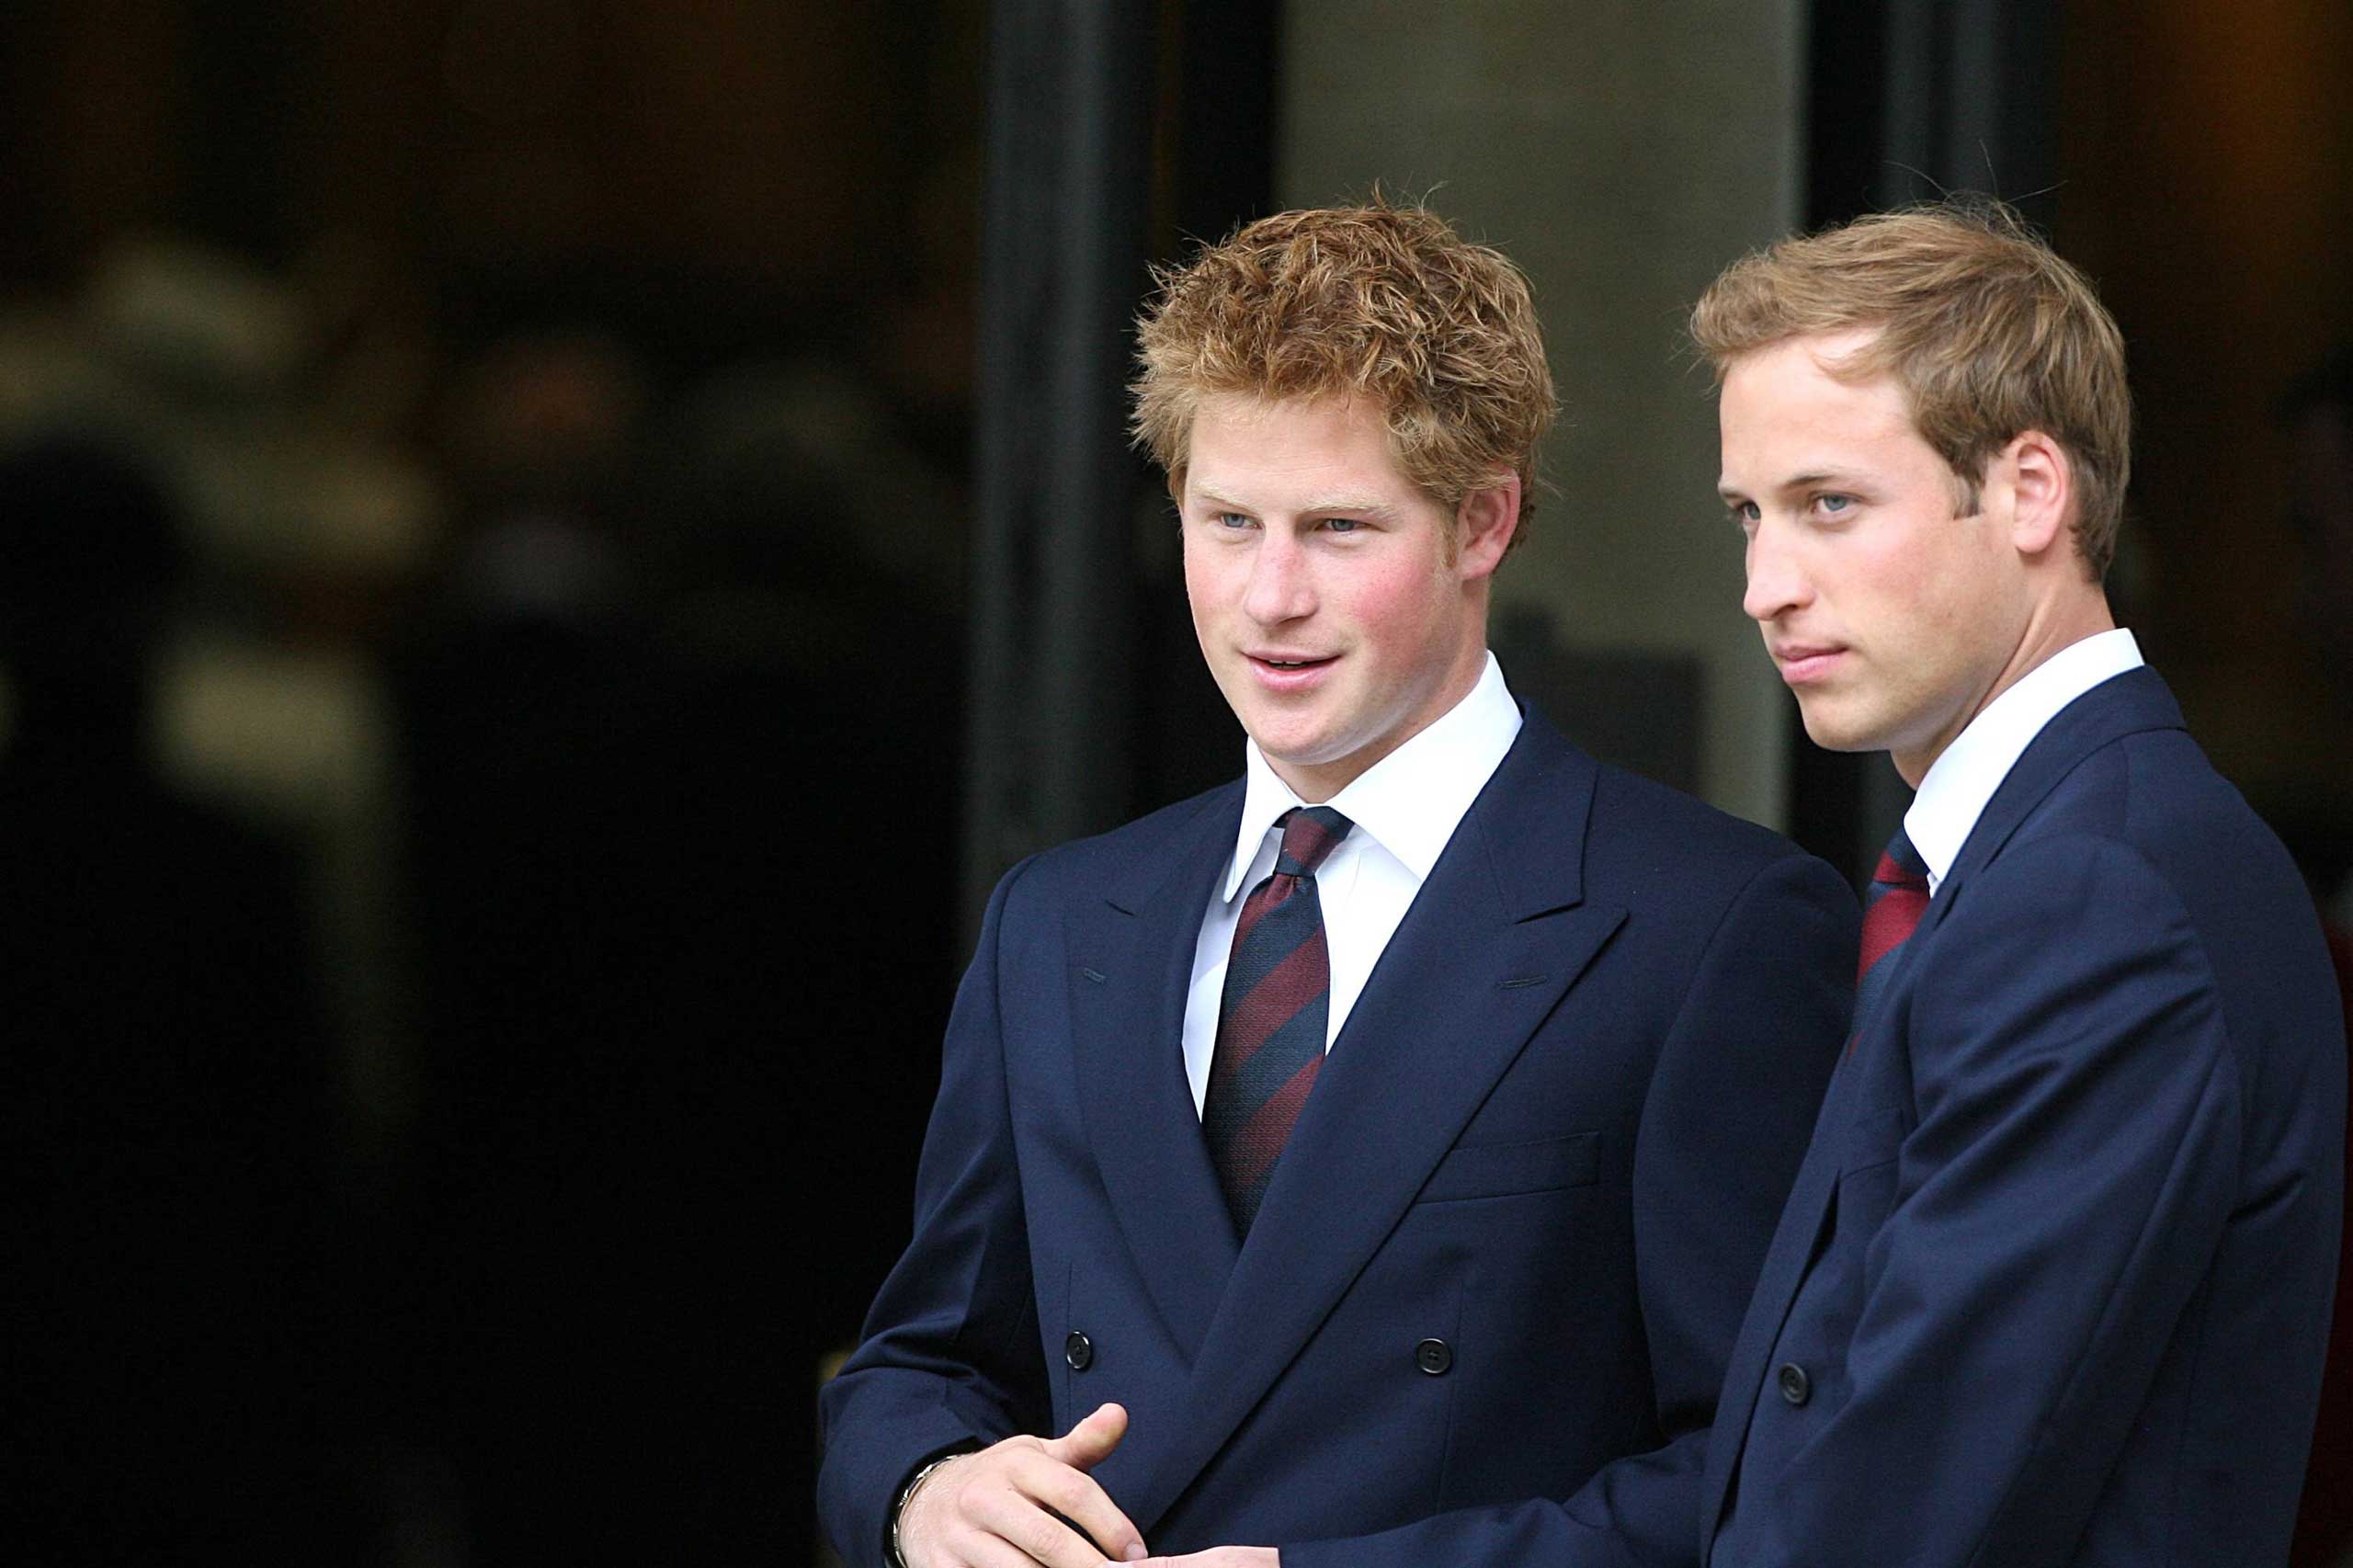 THE PRINCES, WILLIAM AND HARRY: The elder William (R) is being groomed to become King of England. Harry, meanwhile, has made headlines for being caught with marijuana and wearing a Nazi uniform.